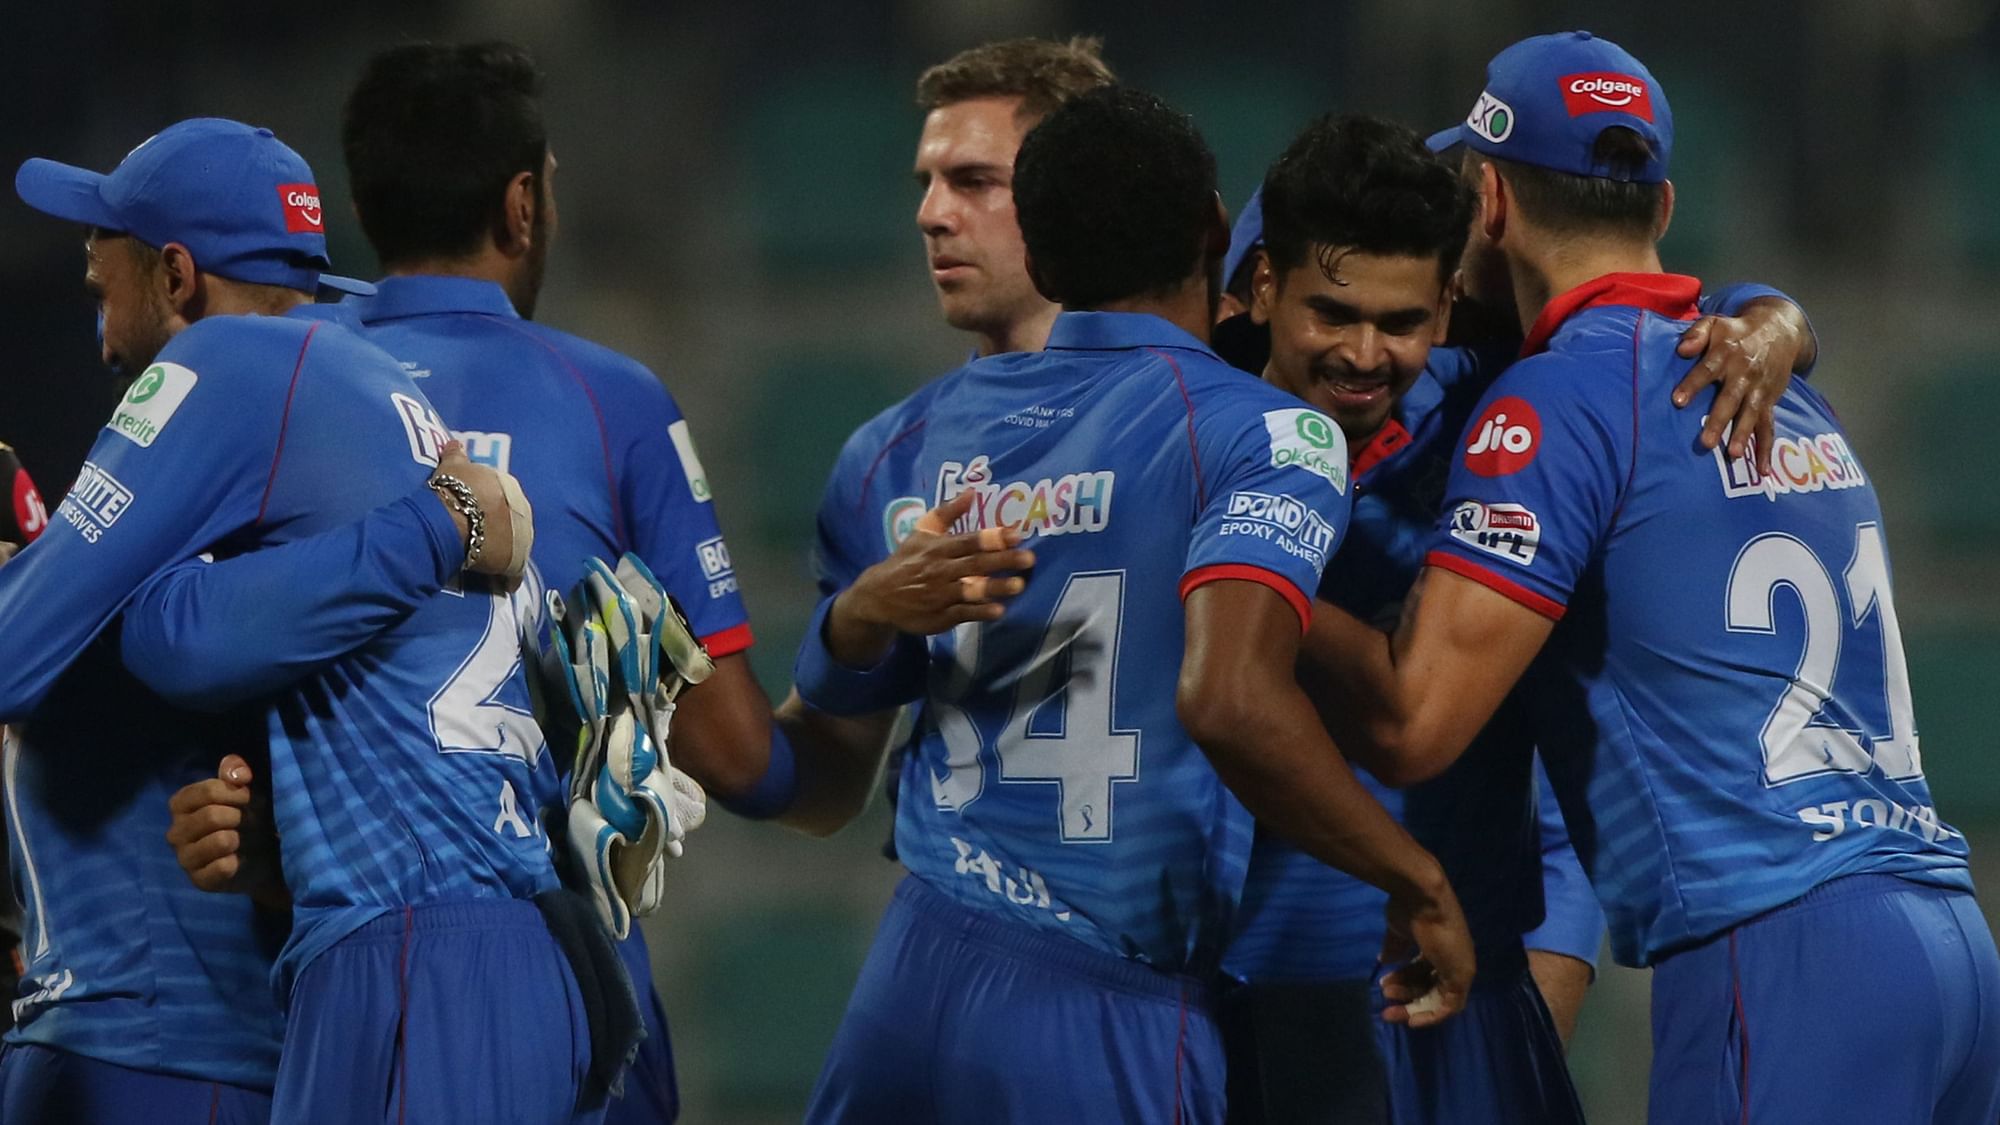 Delhi Capitals beat Sunrisers Hyderabad by 17 runs to reach their first ever IPL final in 13 years.